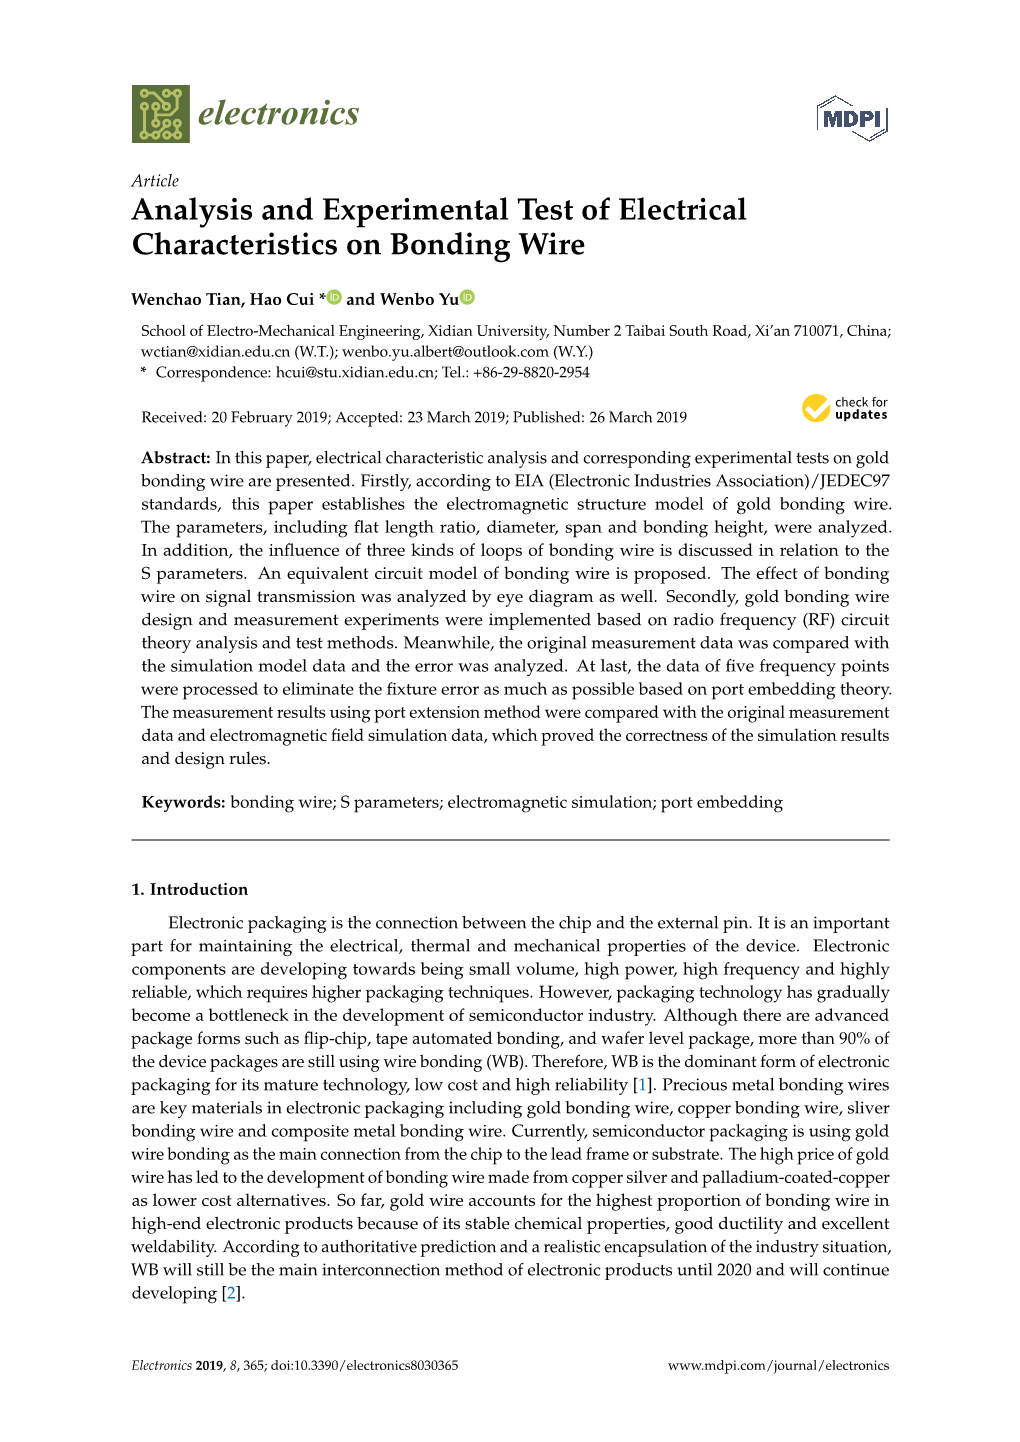 Analysis and Experimental Test of Electrical Characteristics on Bonding Wire